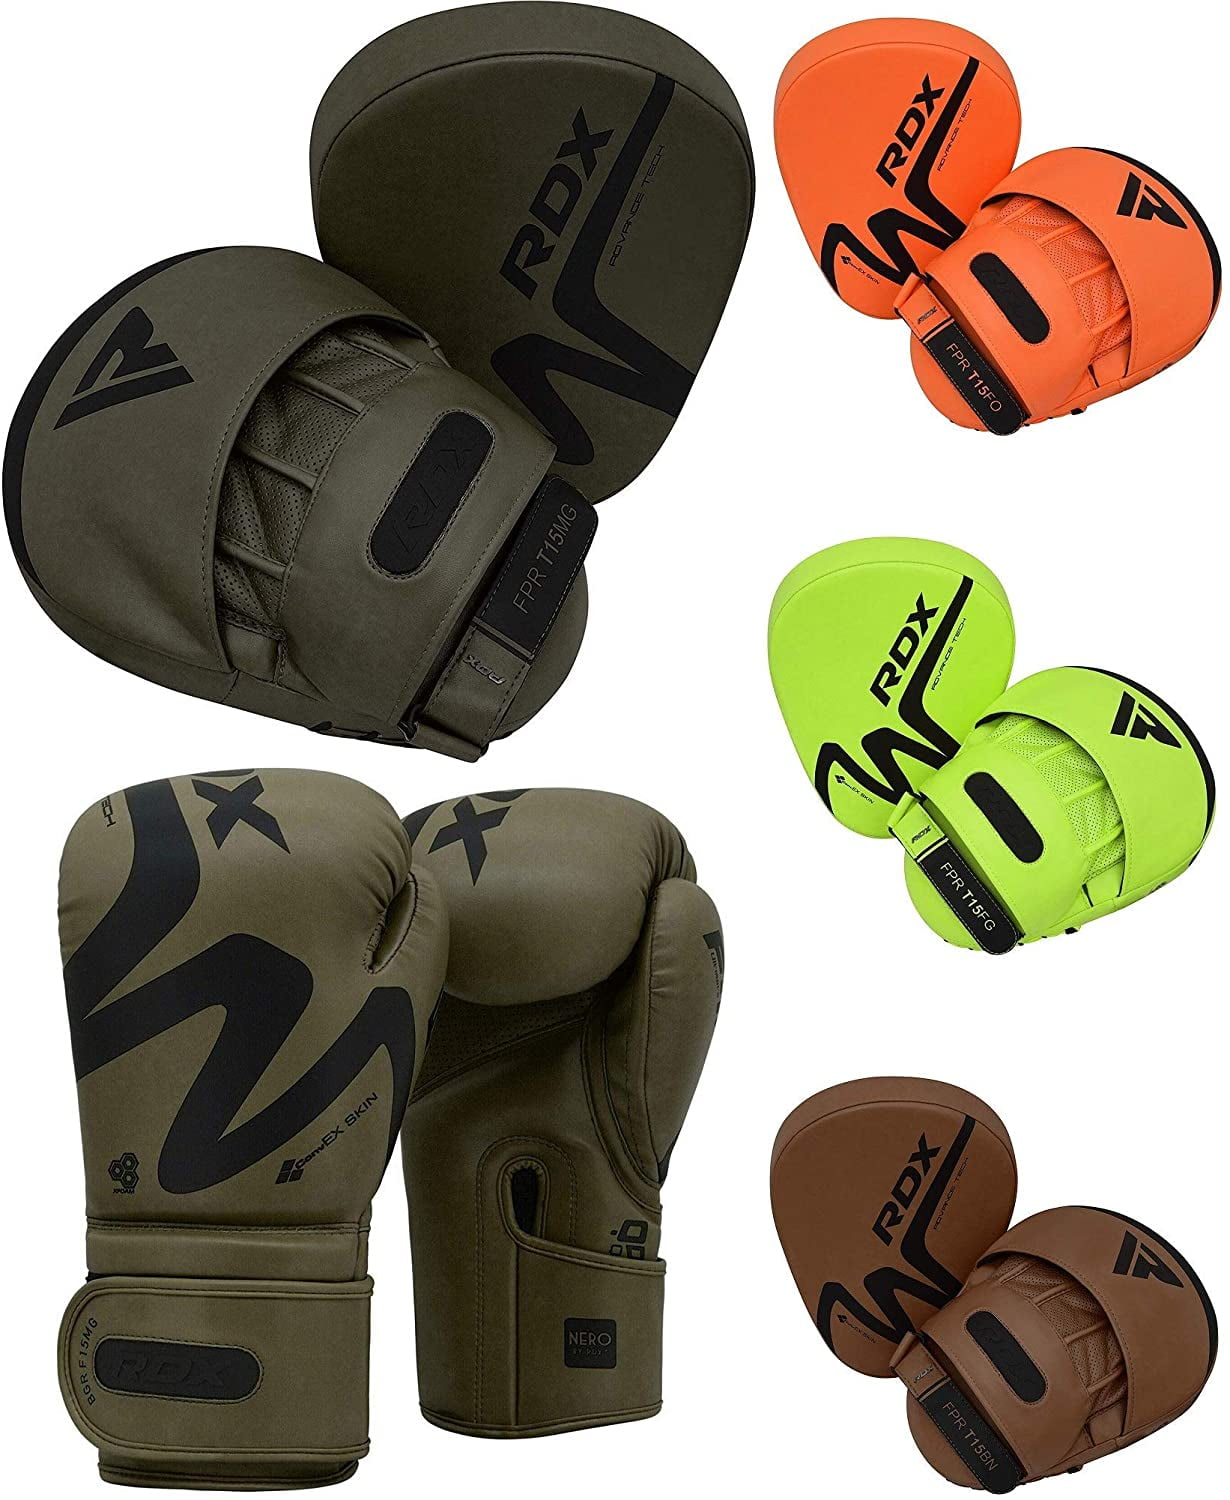 Adults Boxing Gloves Focus Pad Set Hook Jab Mitts Punch Bag Rp Gym Training MMA 